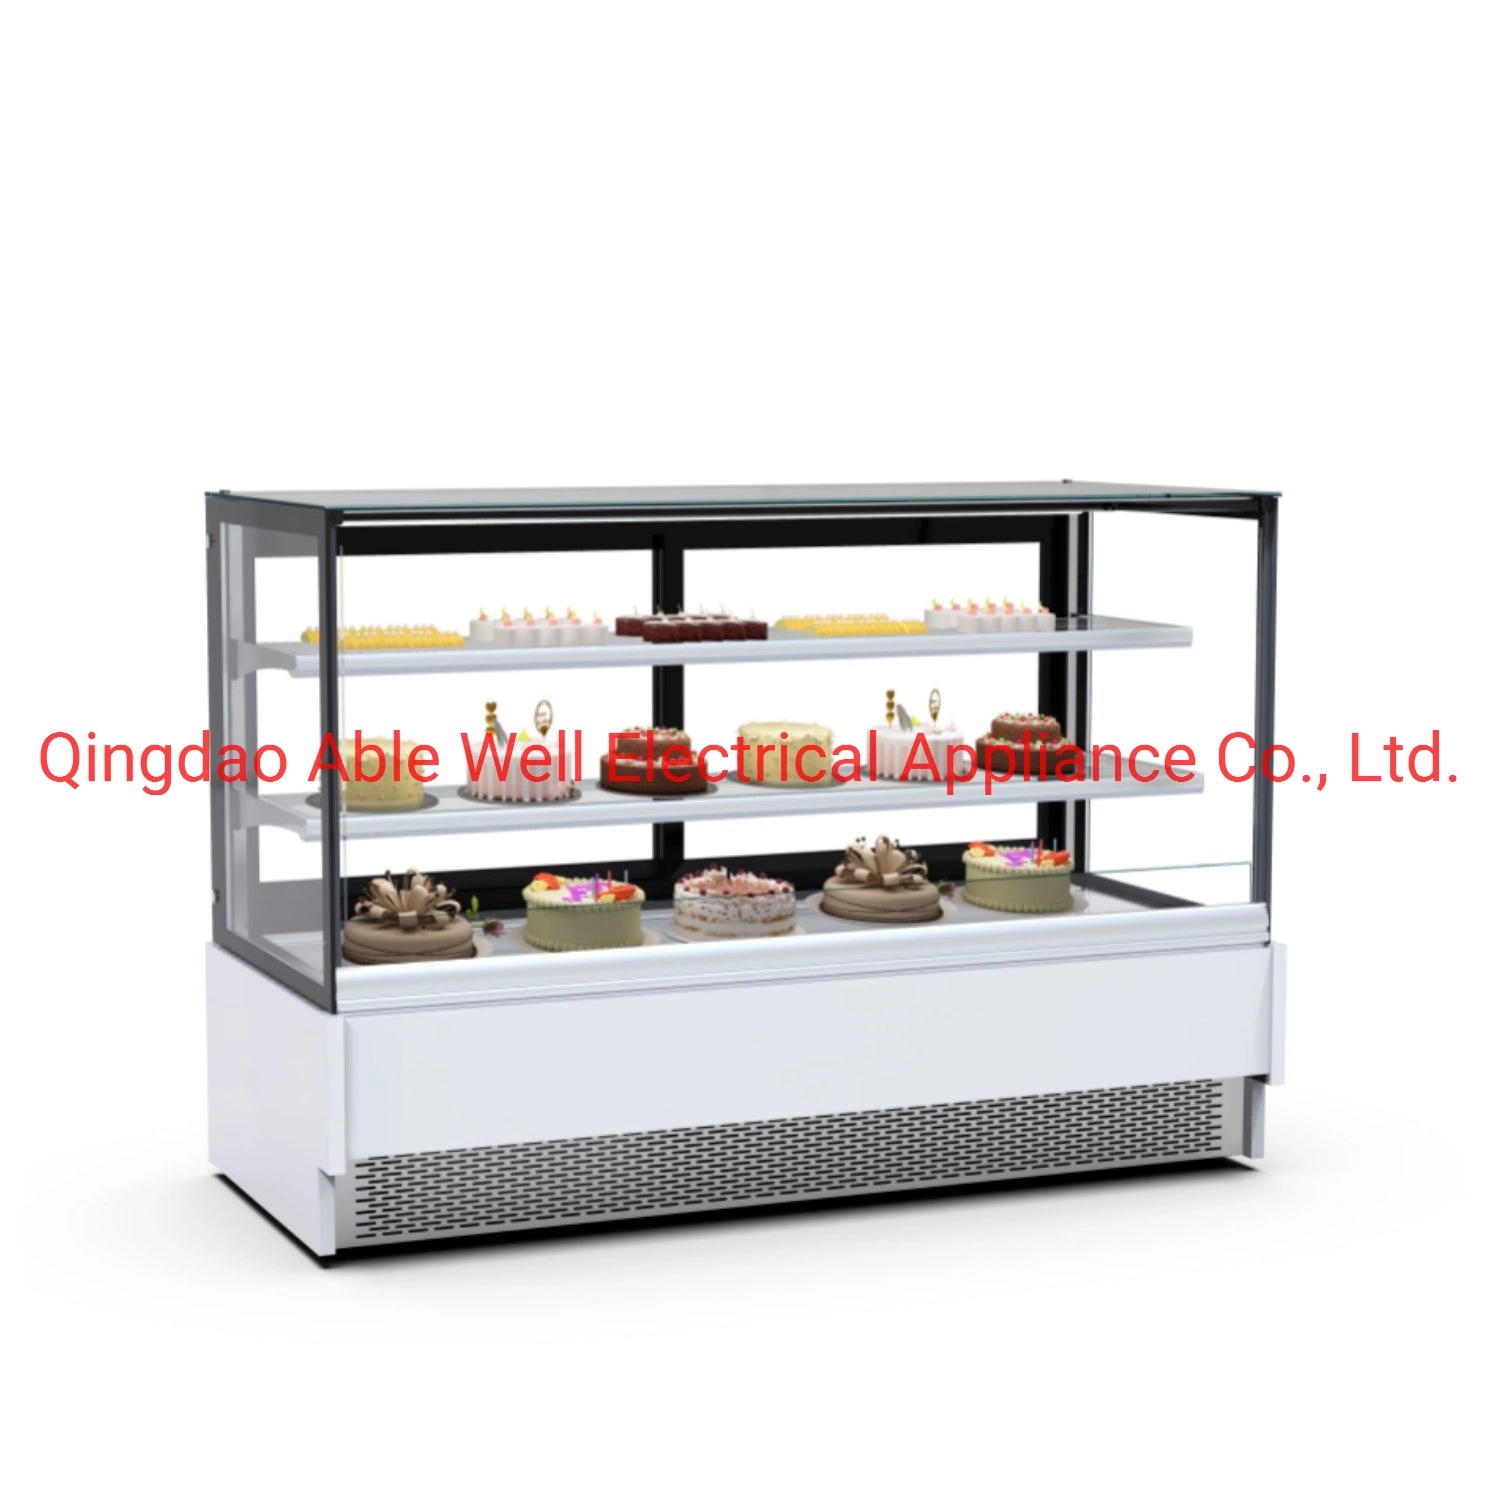 Qingdao Able Well Sale Refrigerated Bakery Bread Cake Showcase Display Cabinet Freezer